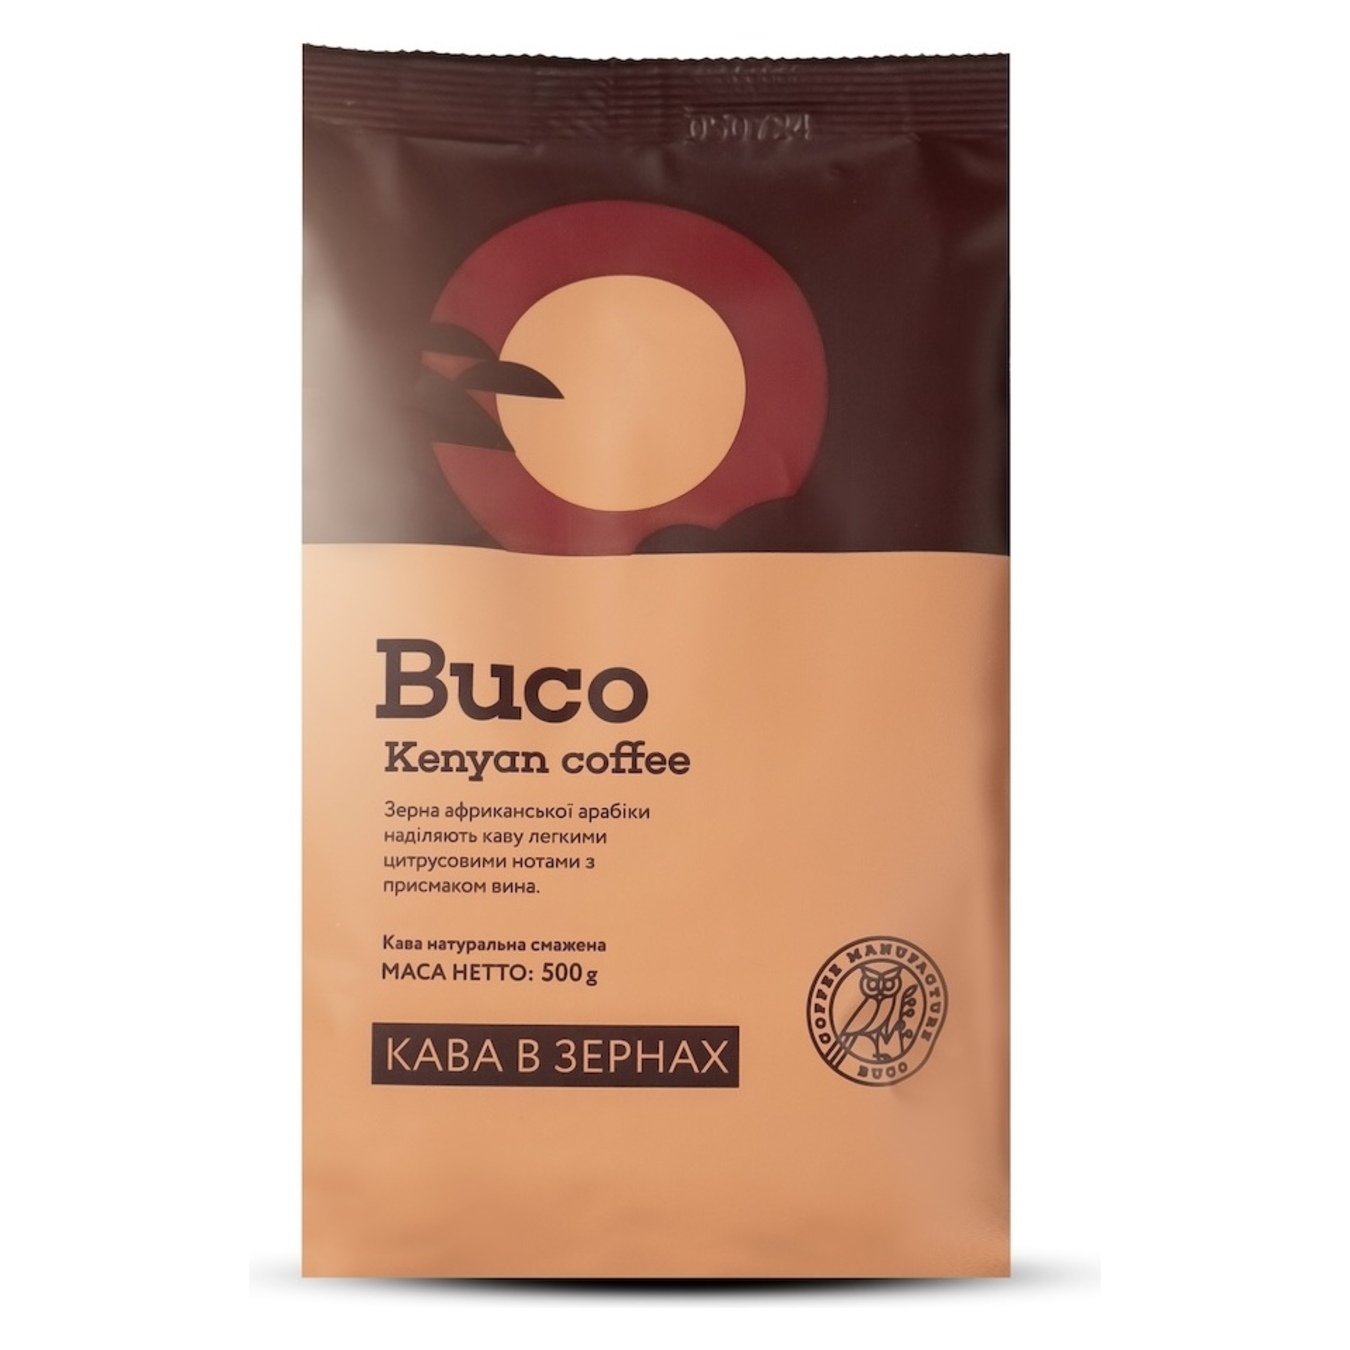 Buco Kenyan coffee coffee beans natural roasted 500g